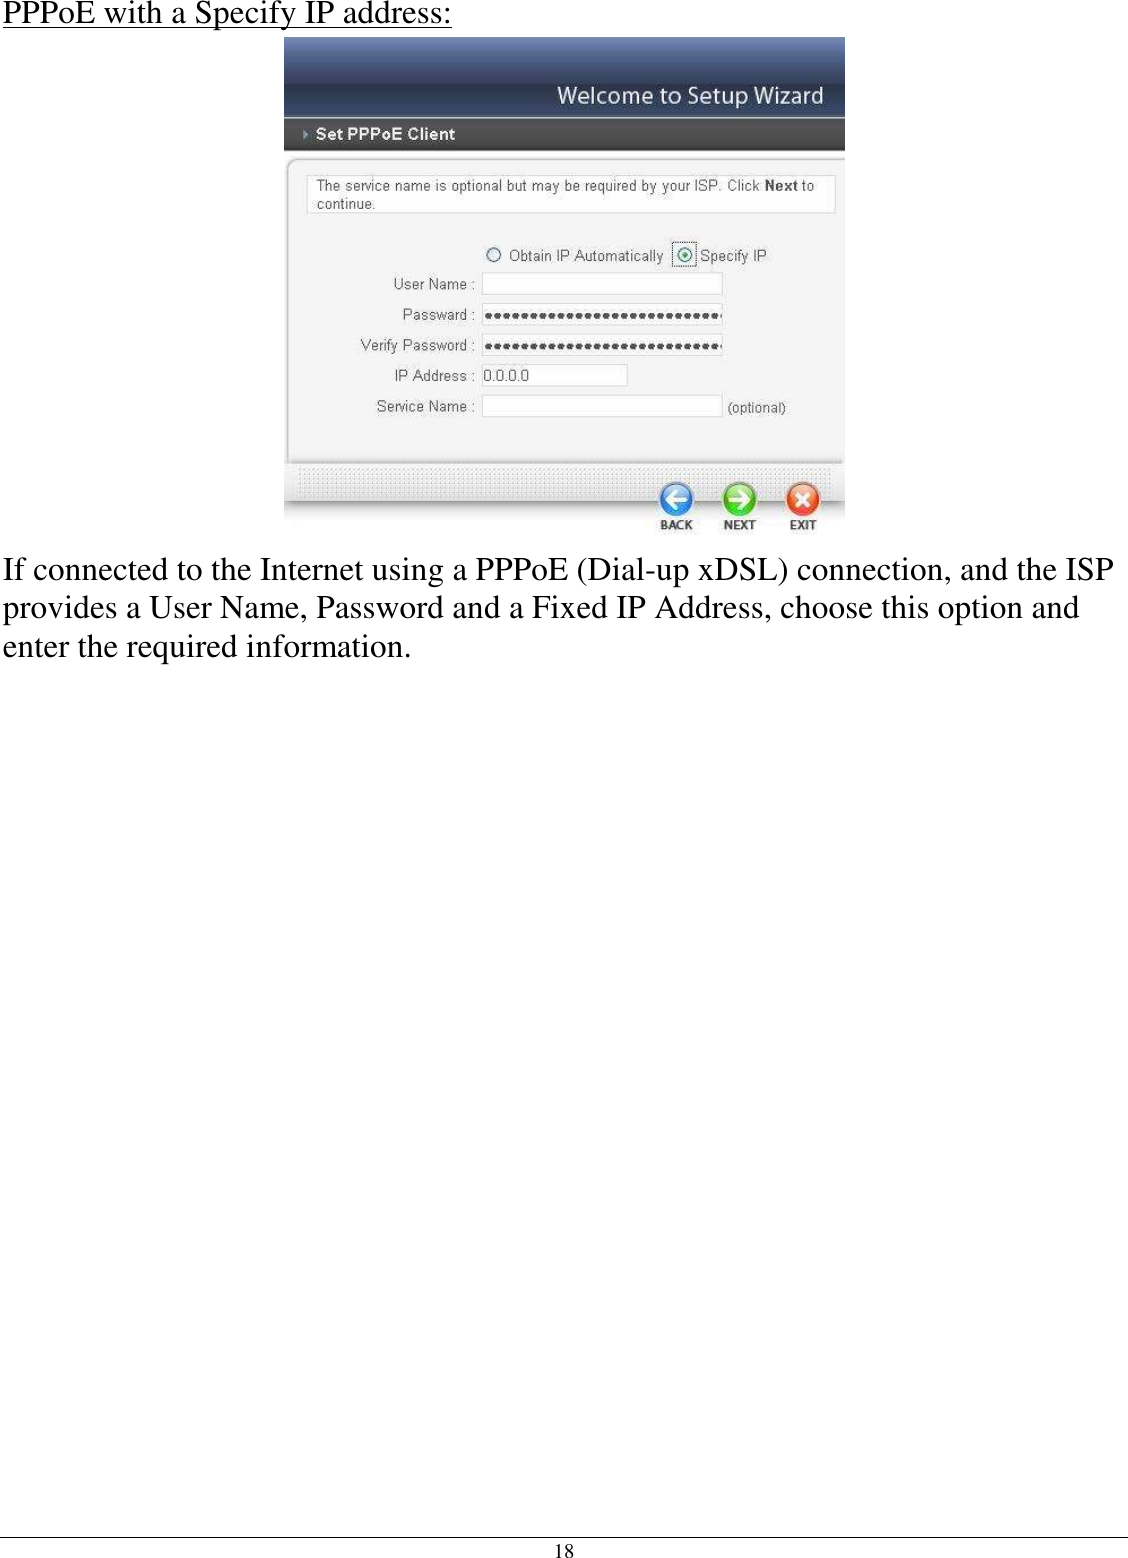 18 PPPoE with a Specify IP address:  If connected to the Internet using a PPPoE (Dial-up xDSL) connection, and the ISP provides a User Name, Password and a Fixed IP Address, choose this option and enter the required information.  